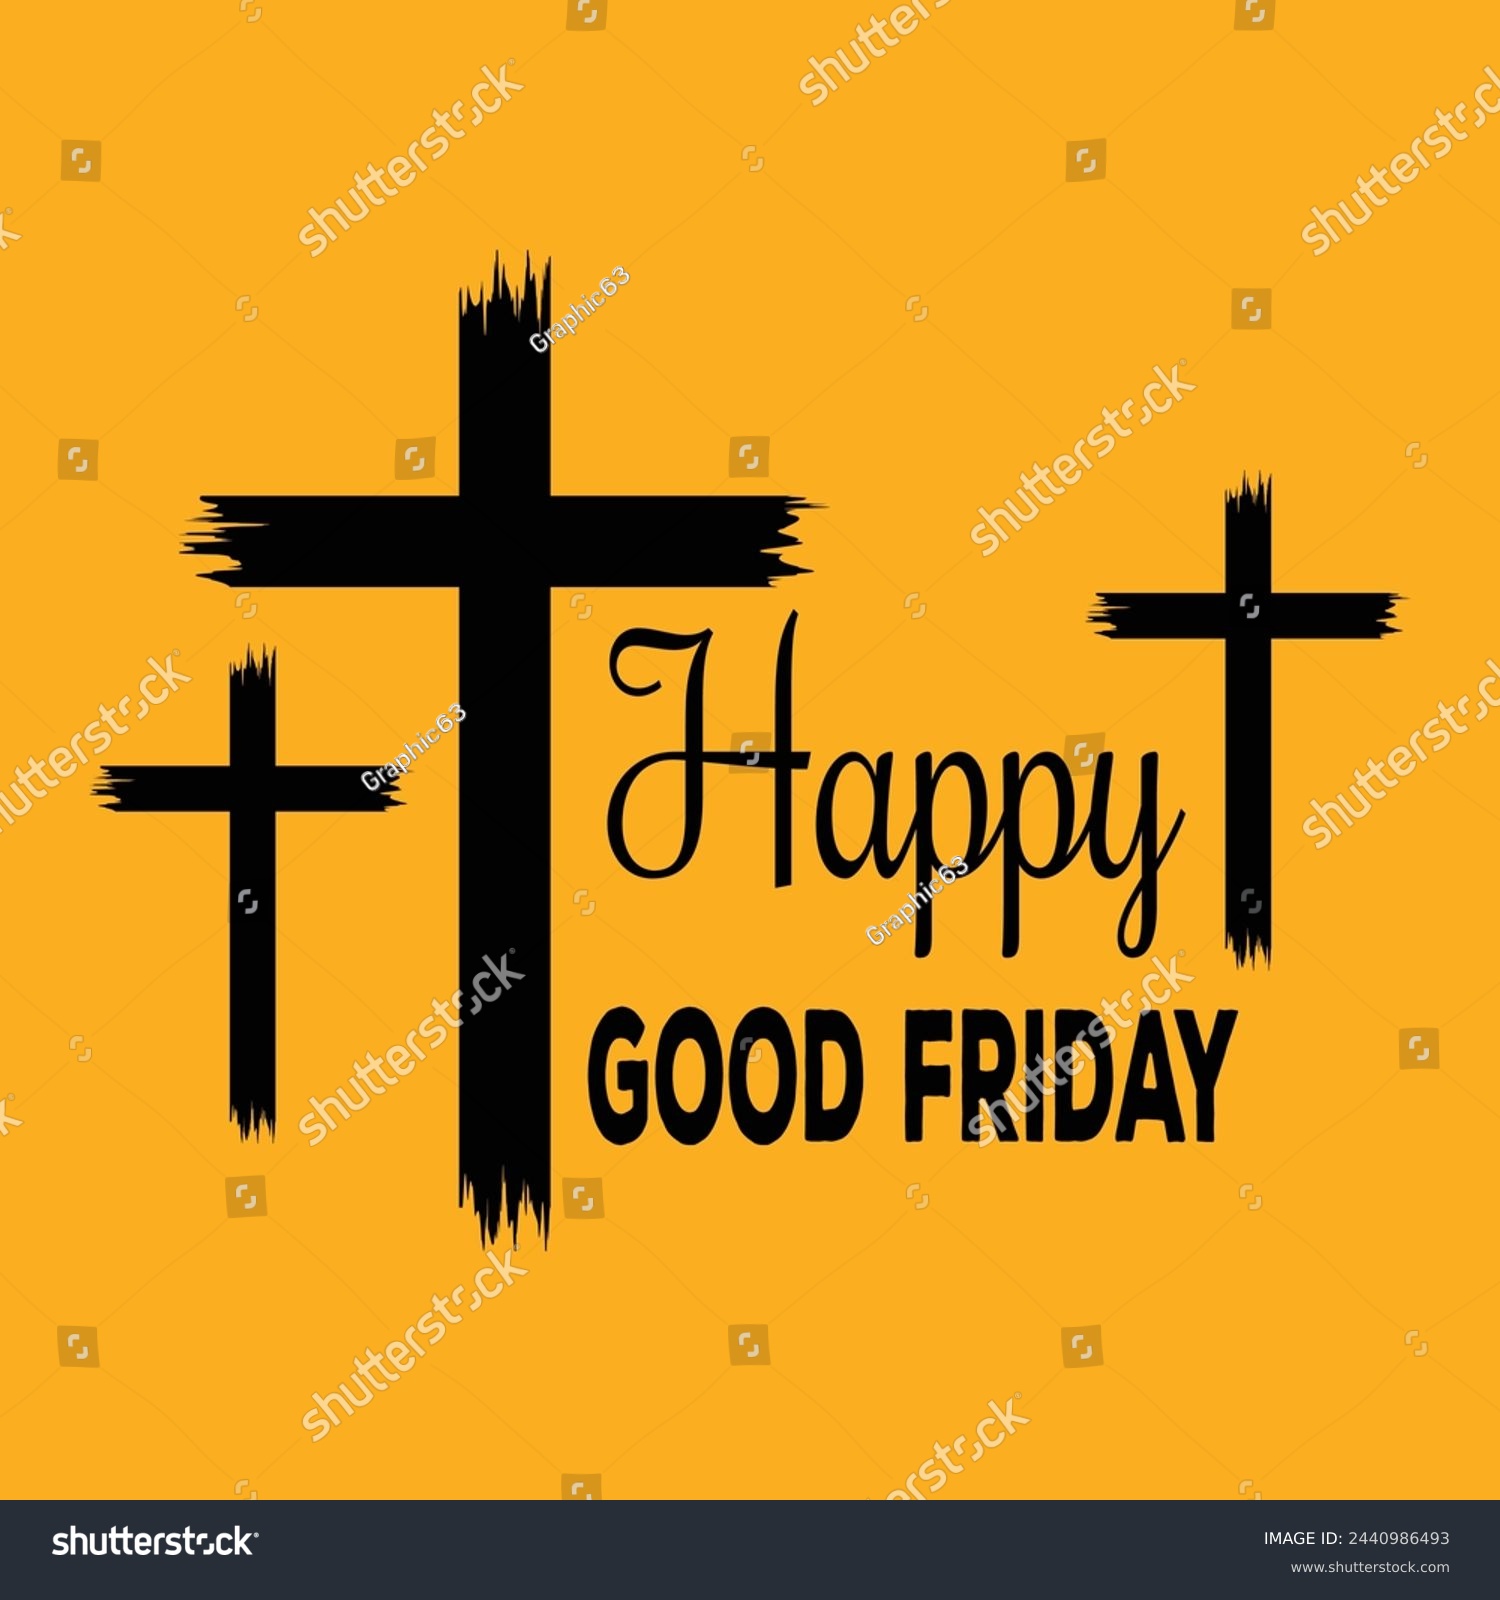 SVG of Good Friday 29 March. Happy Good Friday. Motivational Typography Quotes Print For T Shirt, Poster, Design Vector Illustration. svg